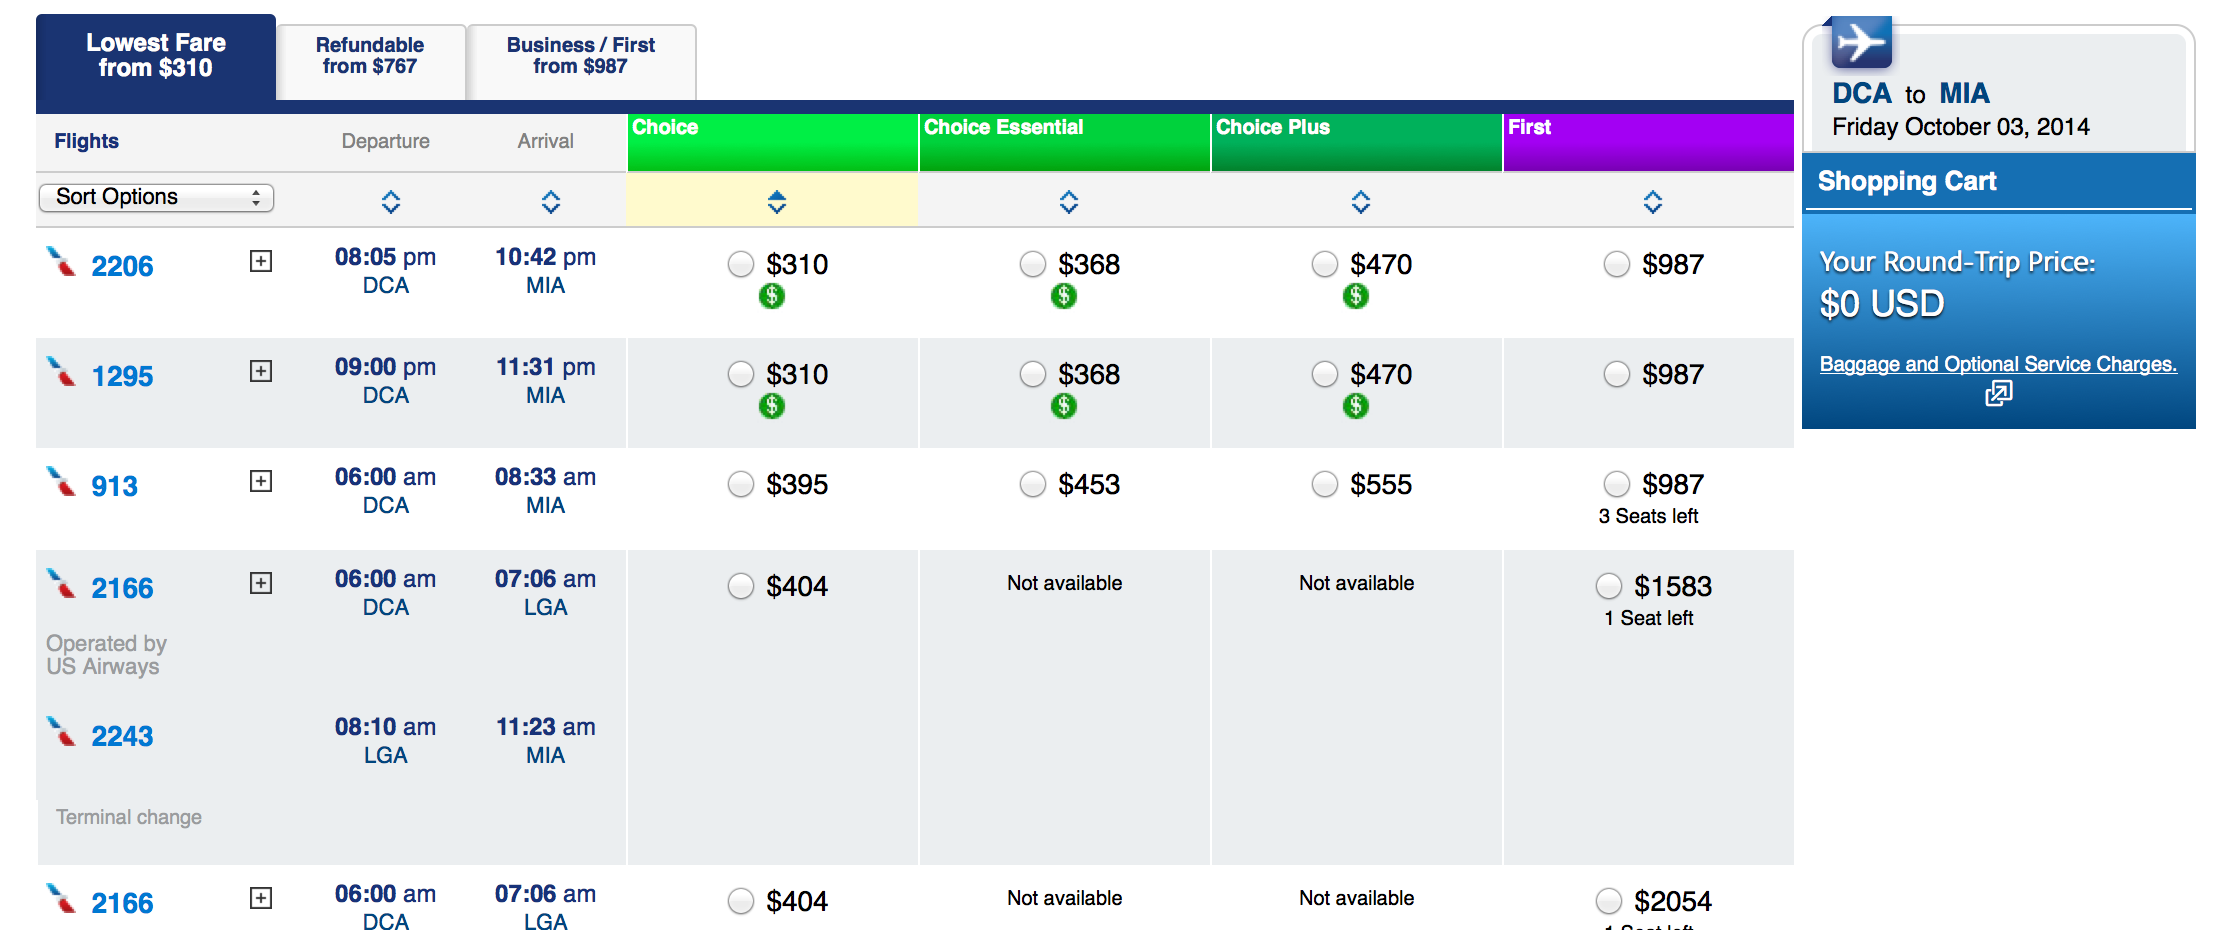 American is now displaying ‘Limited Time Offers’ at booking